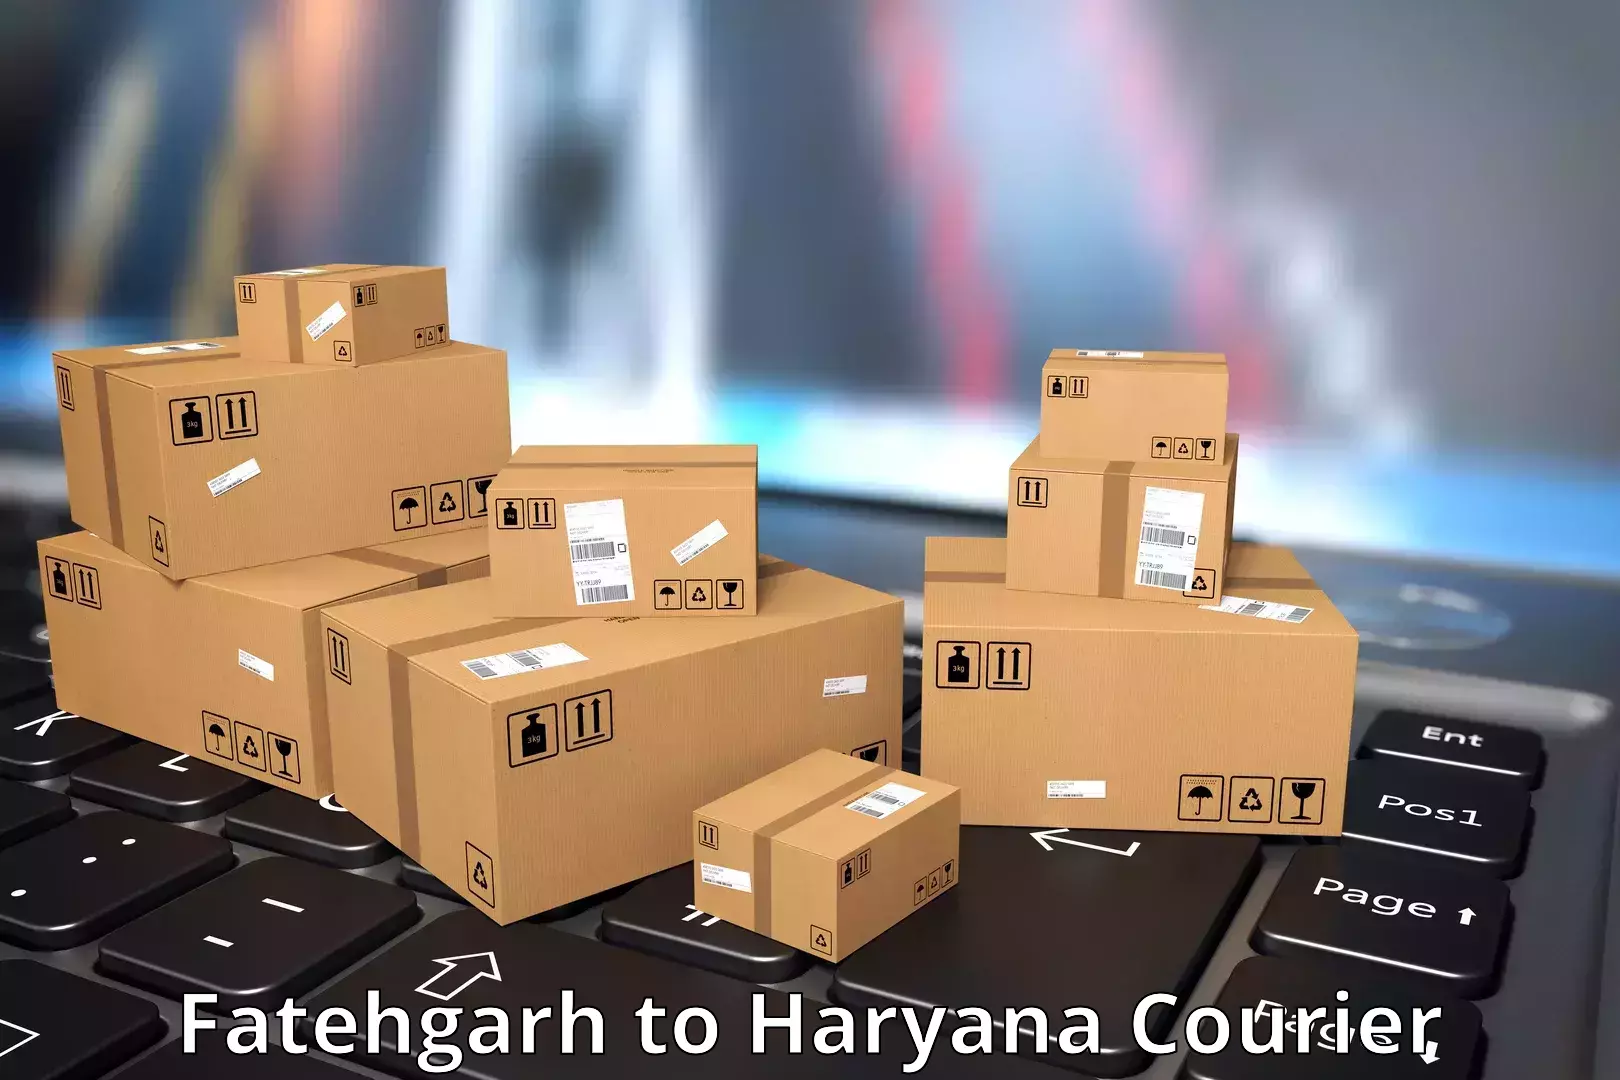 User-friendly courier app Fatehgarh to NCR Haryana